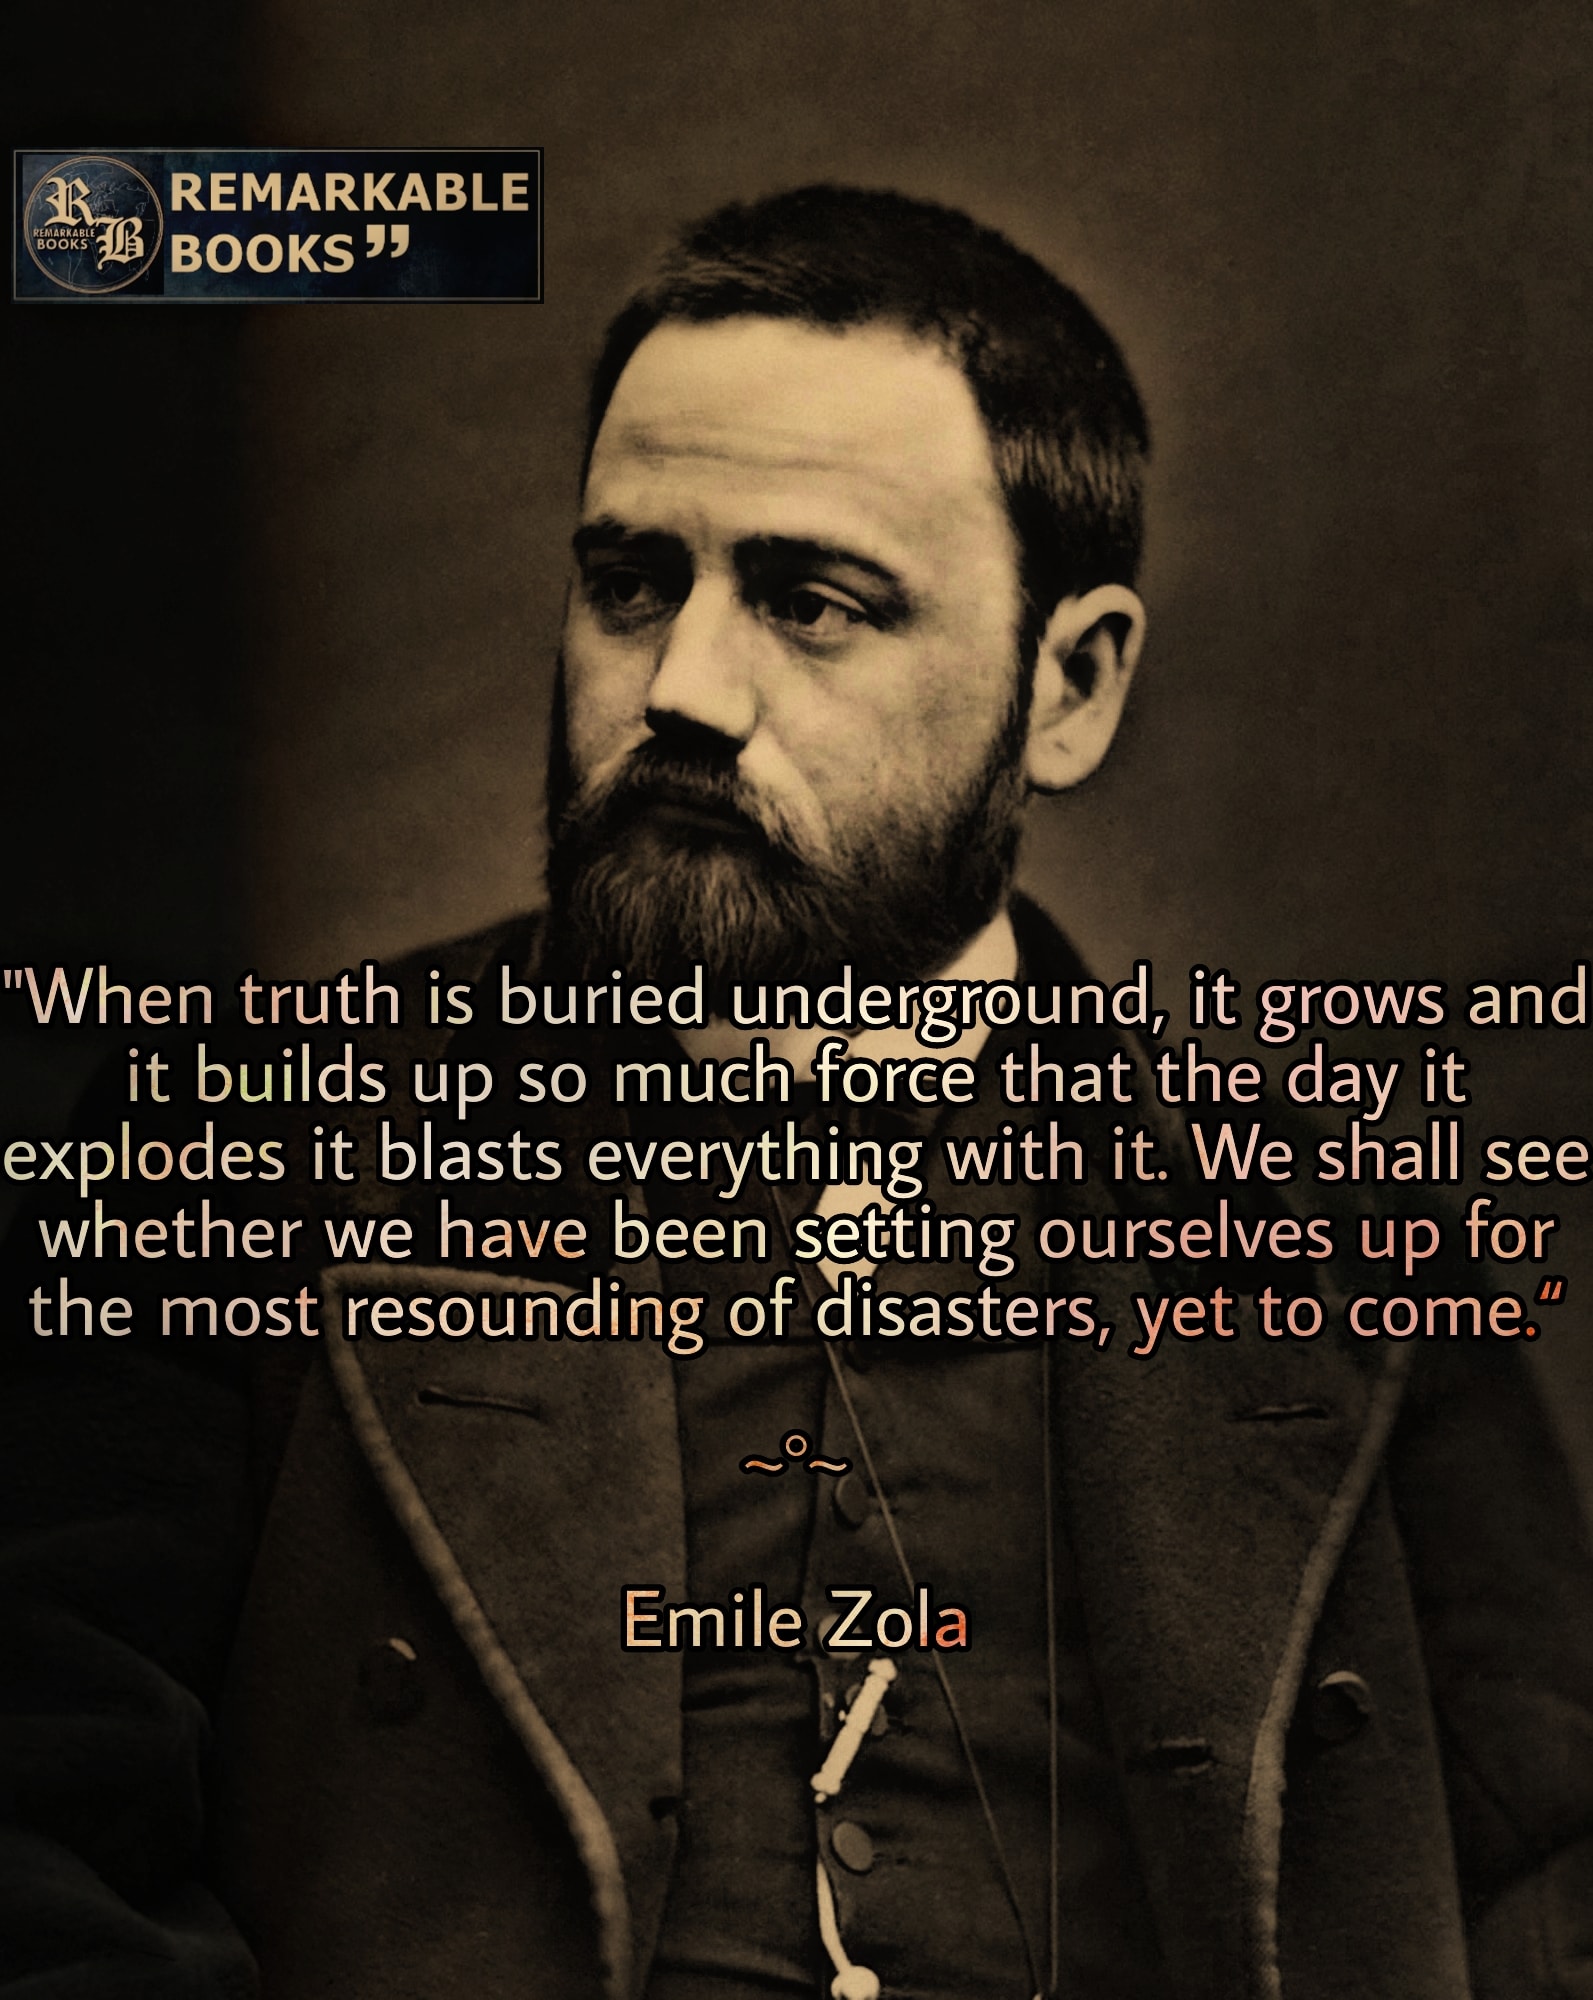 When truth is buried underground it grows, it chokes, it gathers such an explosive force that on the day it bursts out, it blows up everything with it.” – Emile Zola